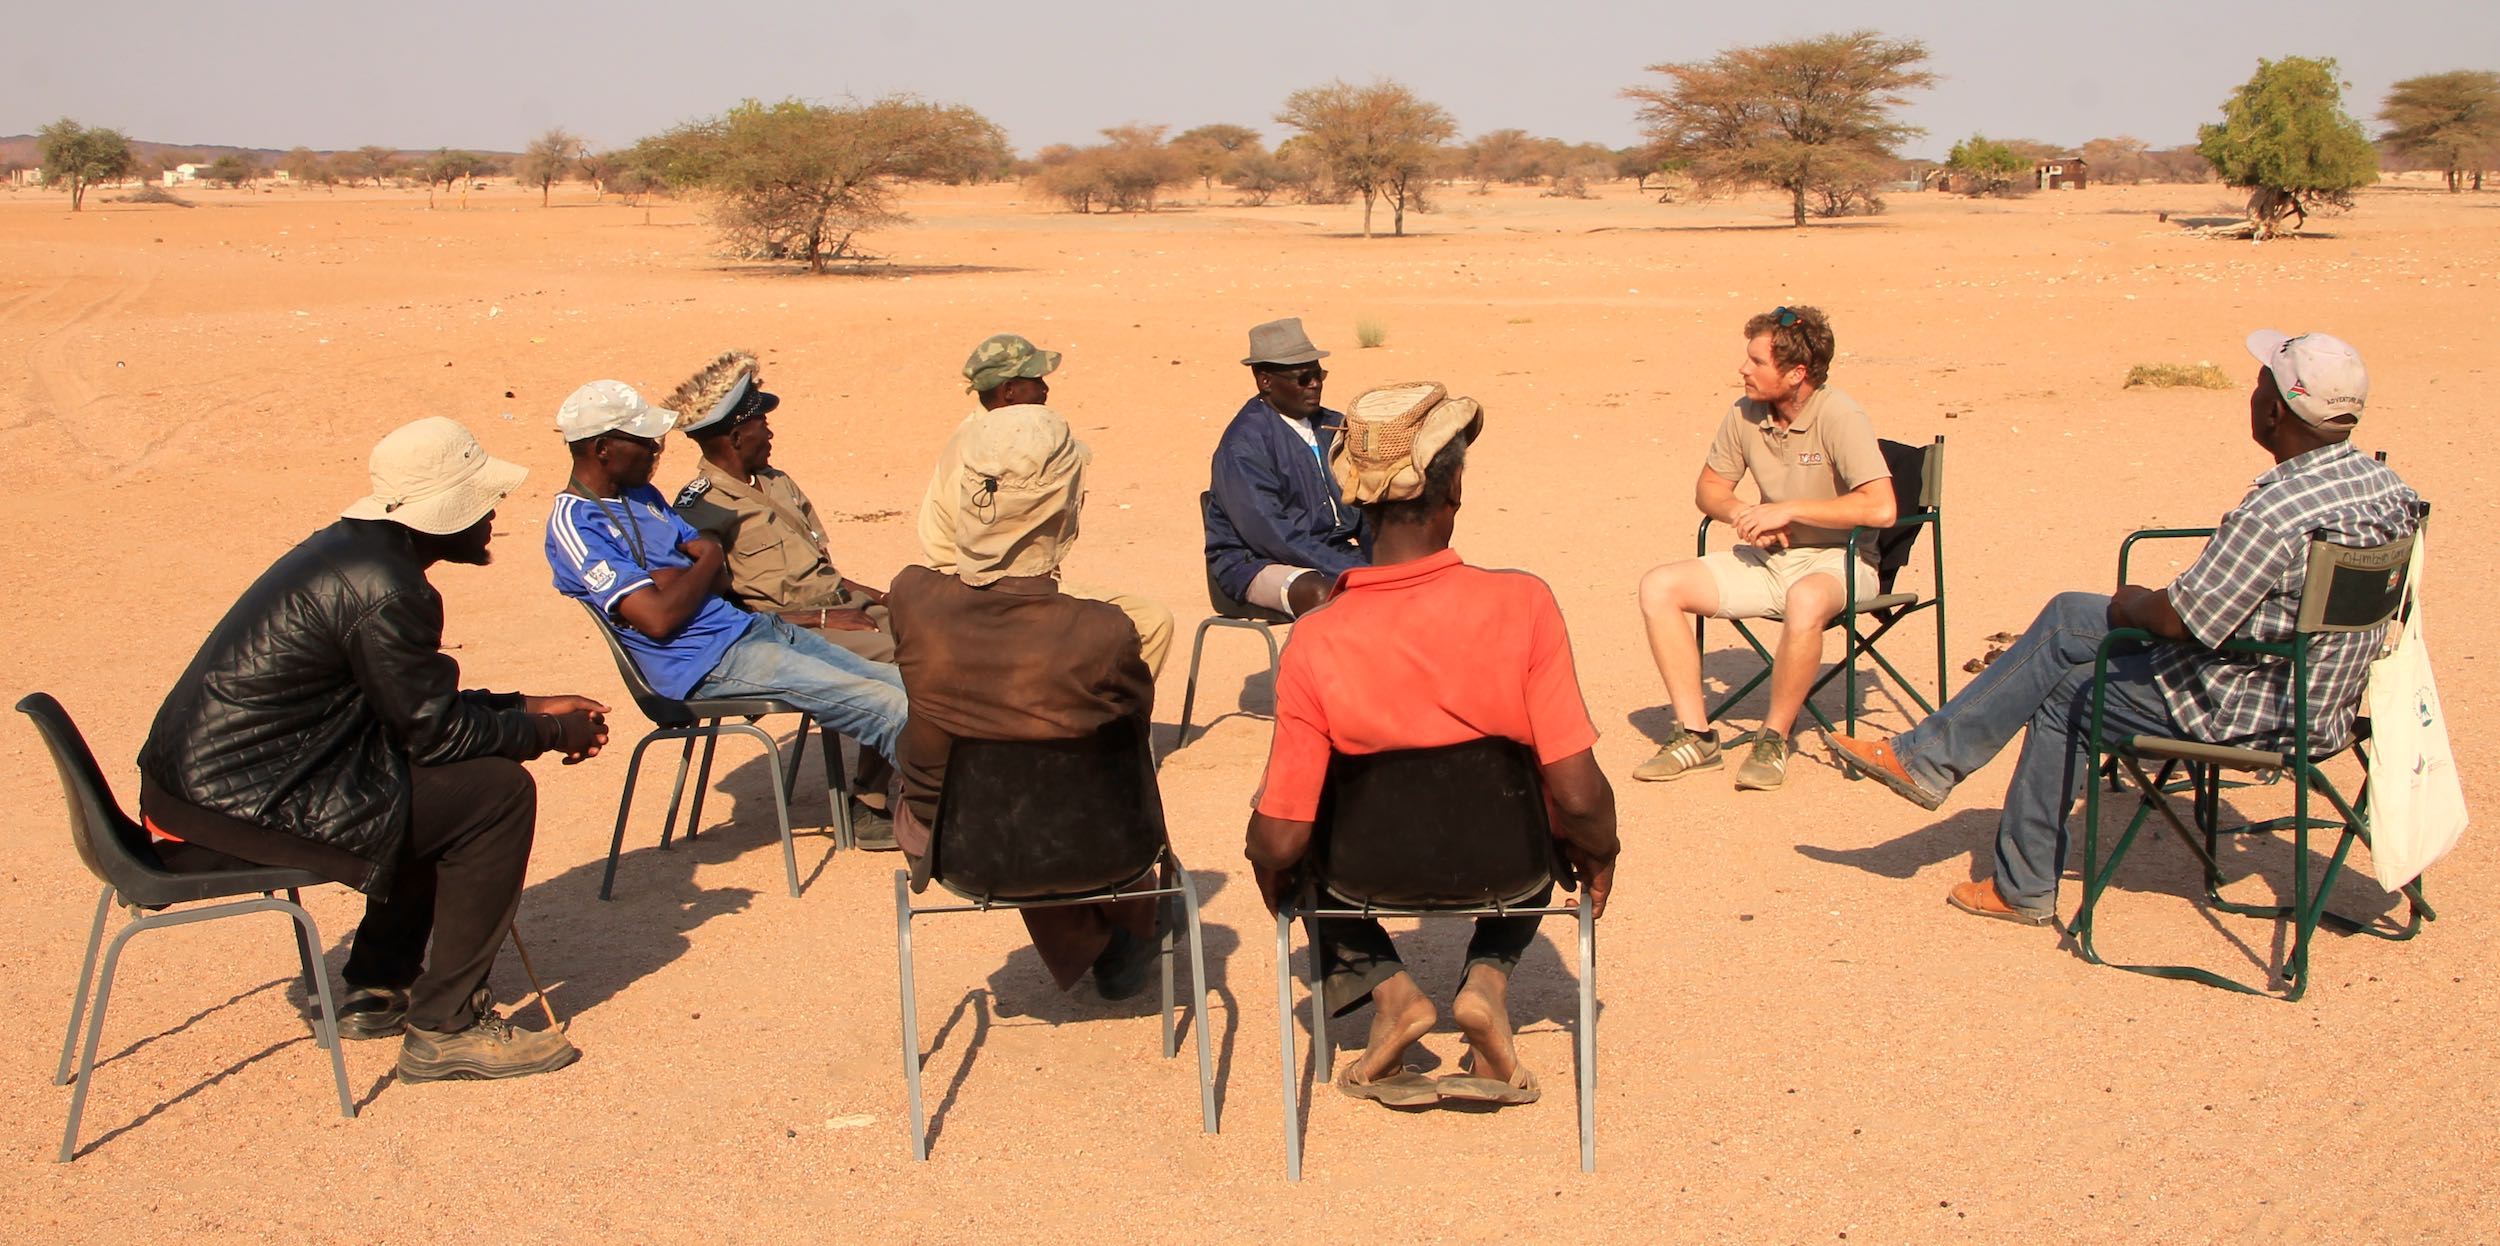 A group of people sitting on a circle of chairs in the desert - a meeting with a view!